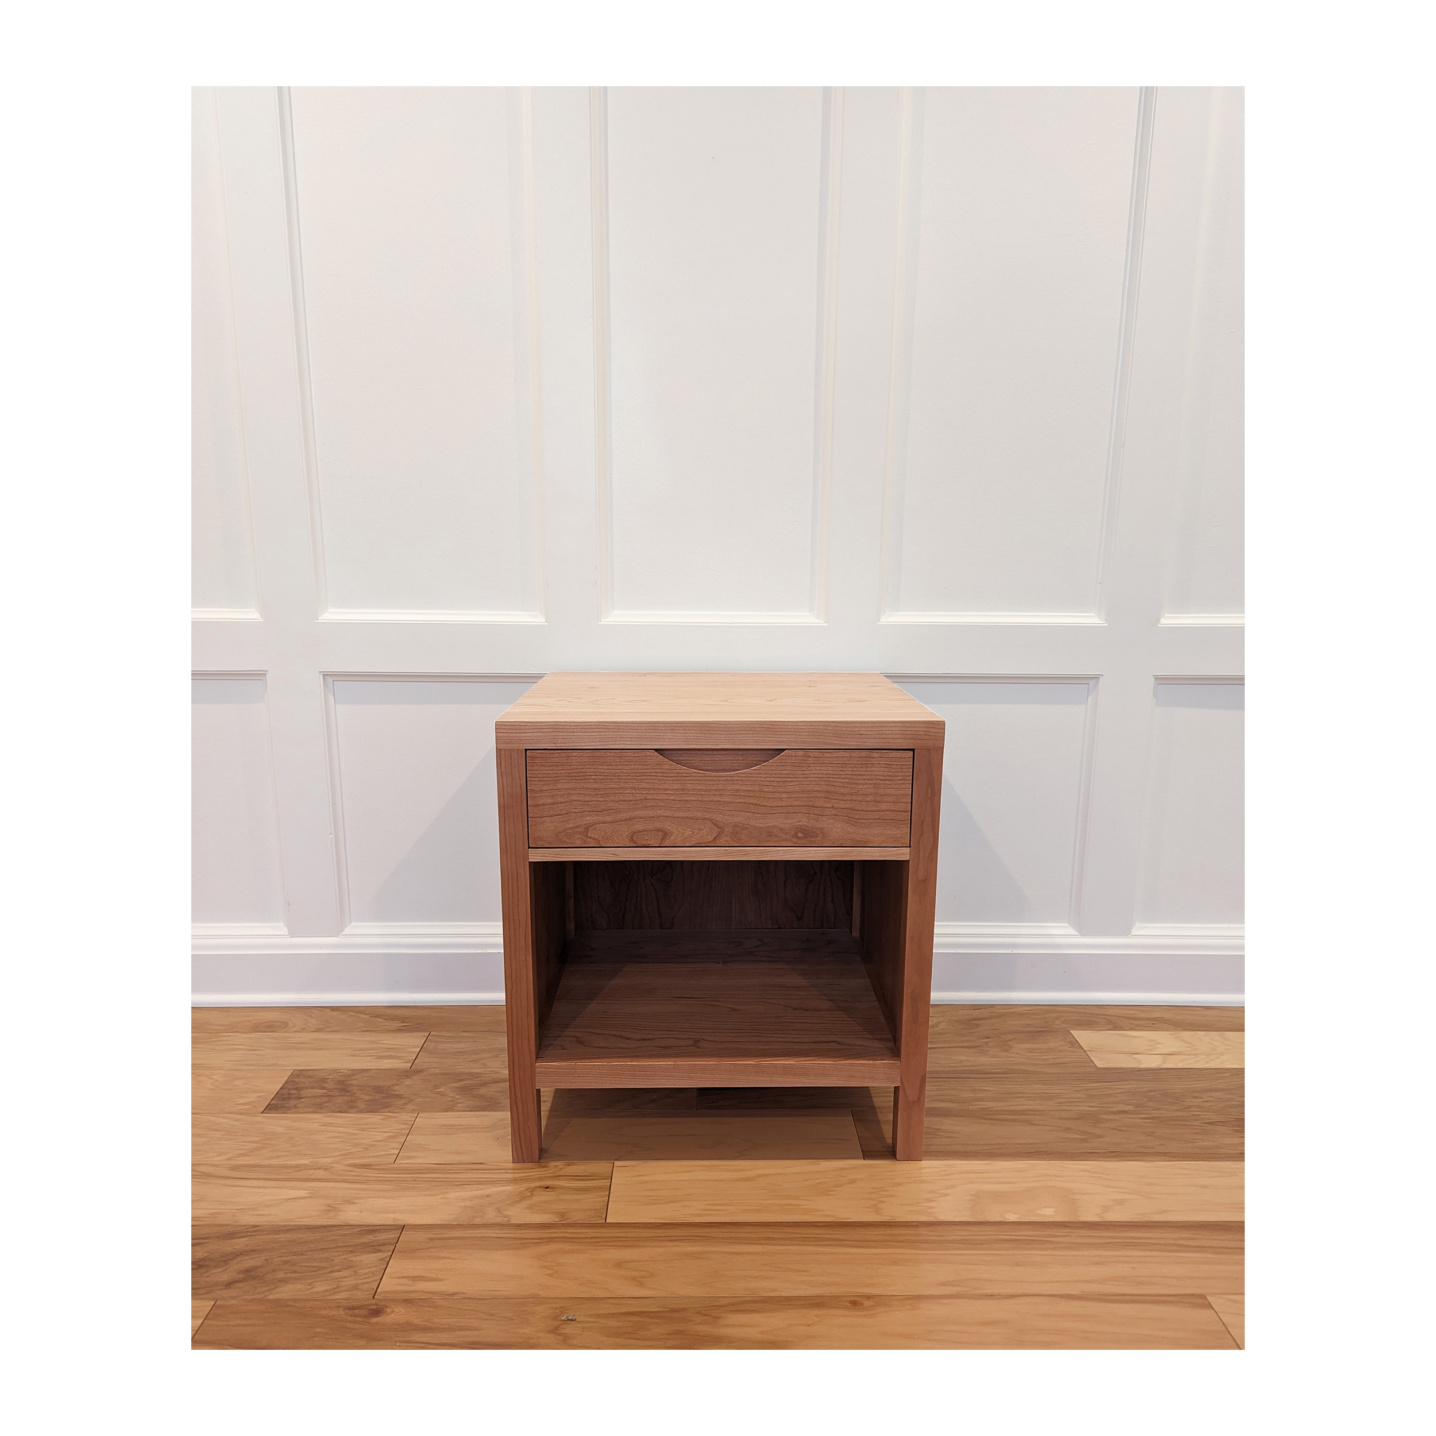 Single Drawer Nightstand--The wood is cherry and the nightstand has a modern design--Made by 57NorthPlank Tailored Modern Furniture